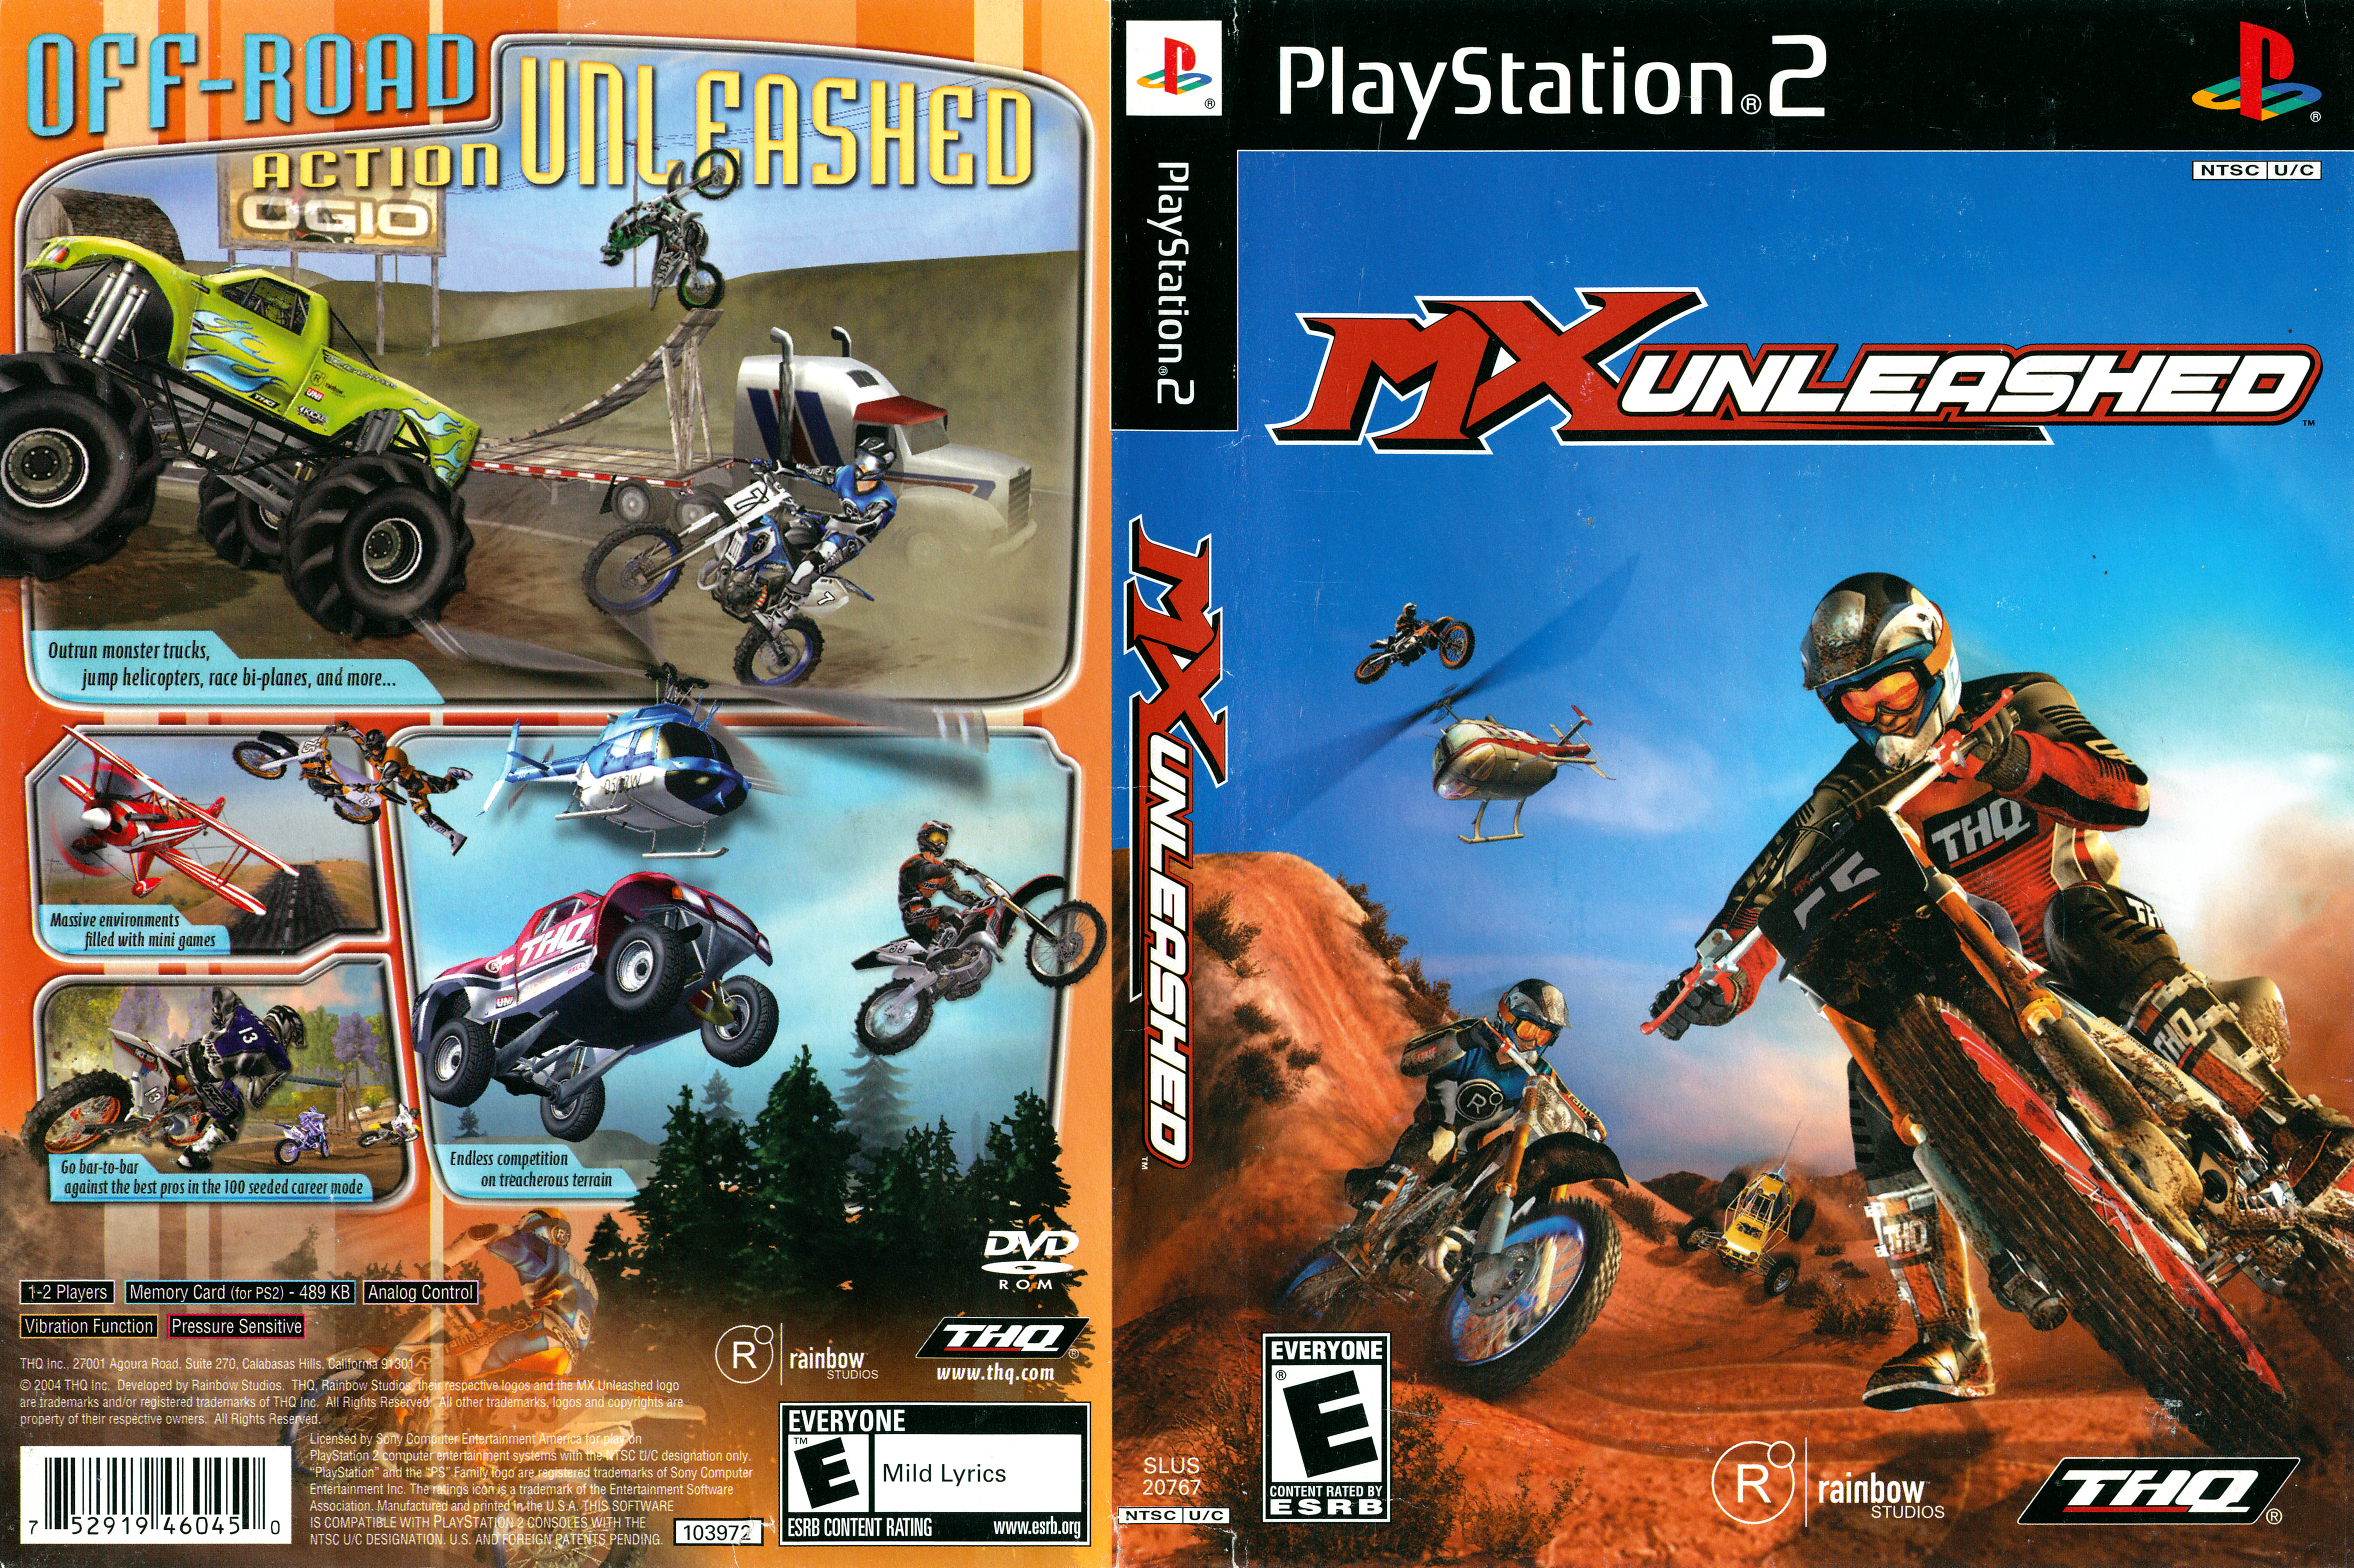 MTX Mototrax - PS2 ROM & ISO Game Download